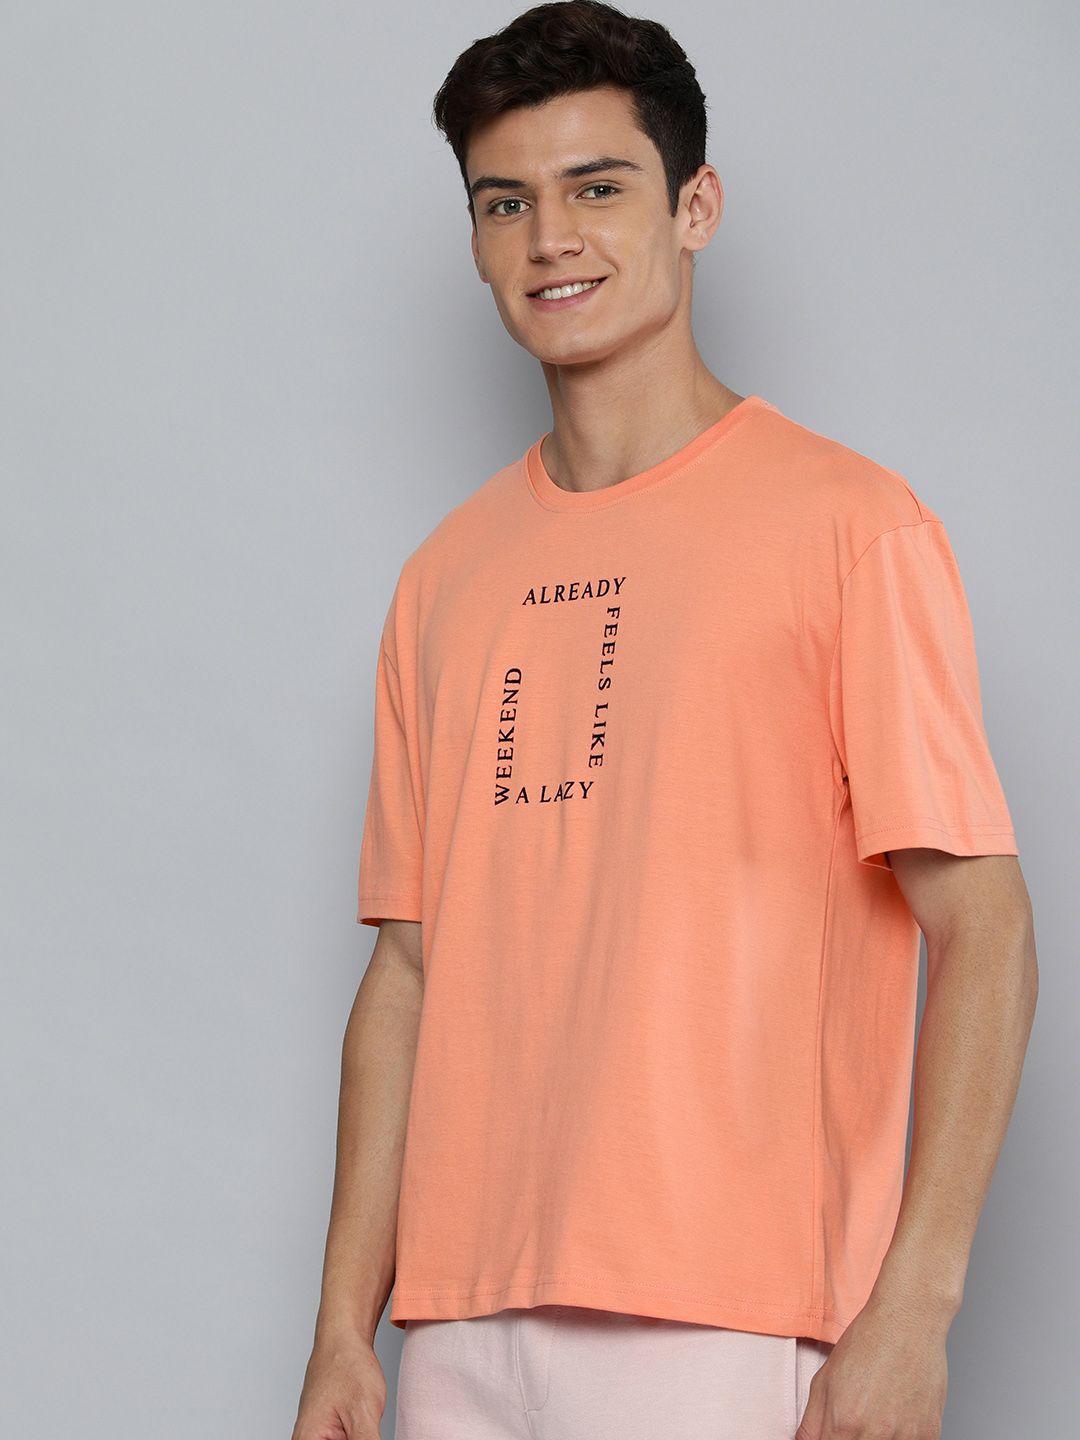 m&h easy men peach-coloured & black typography printed pure cotton t-shirt